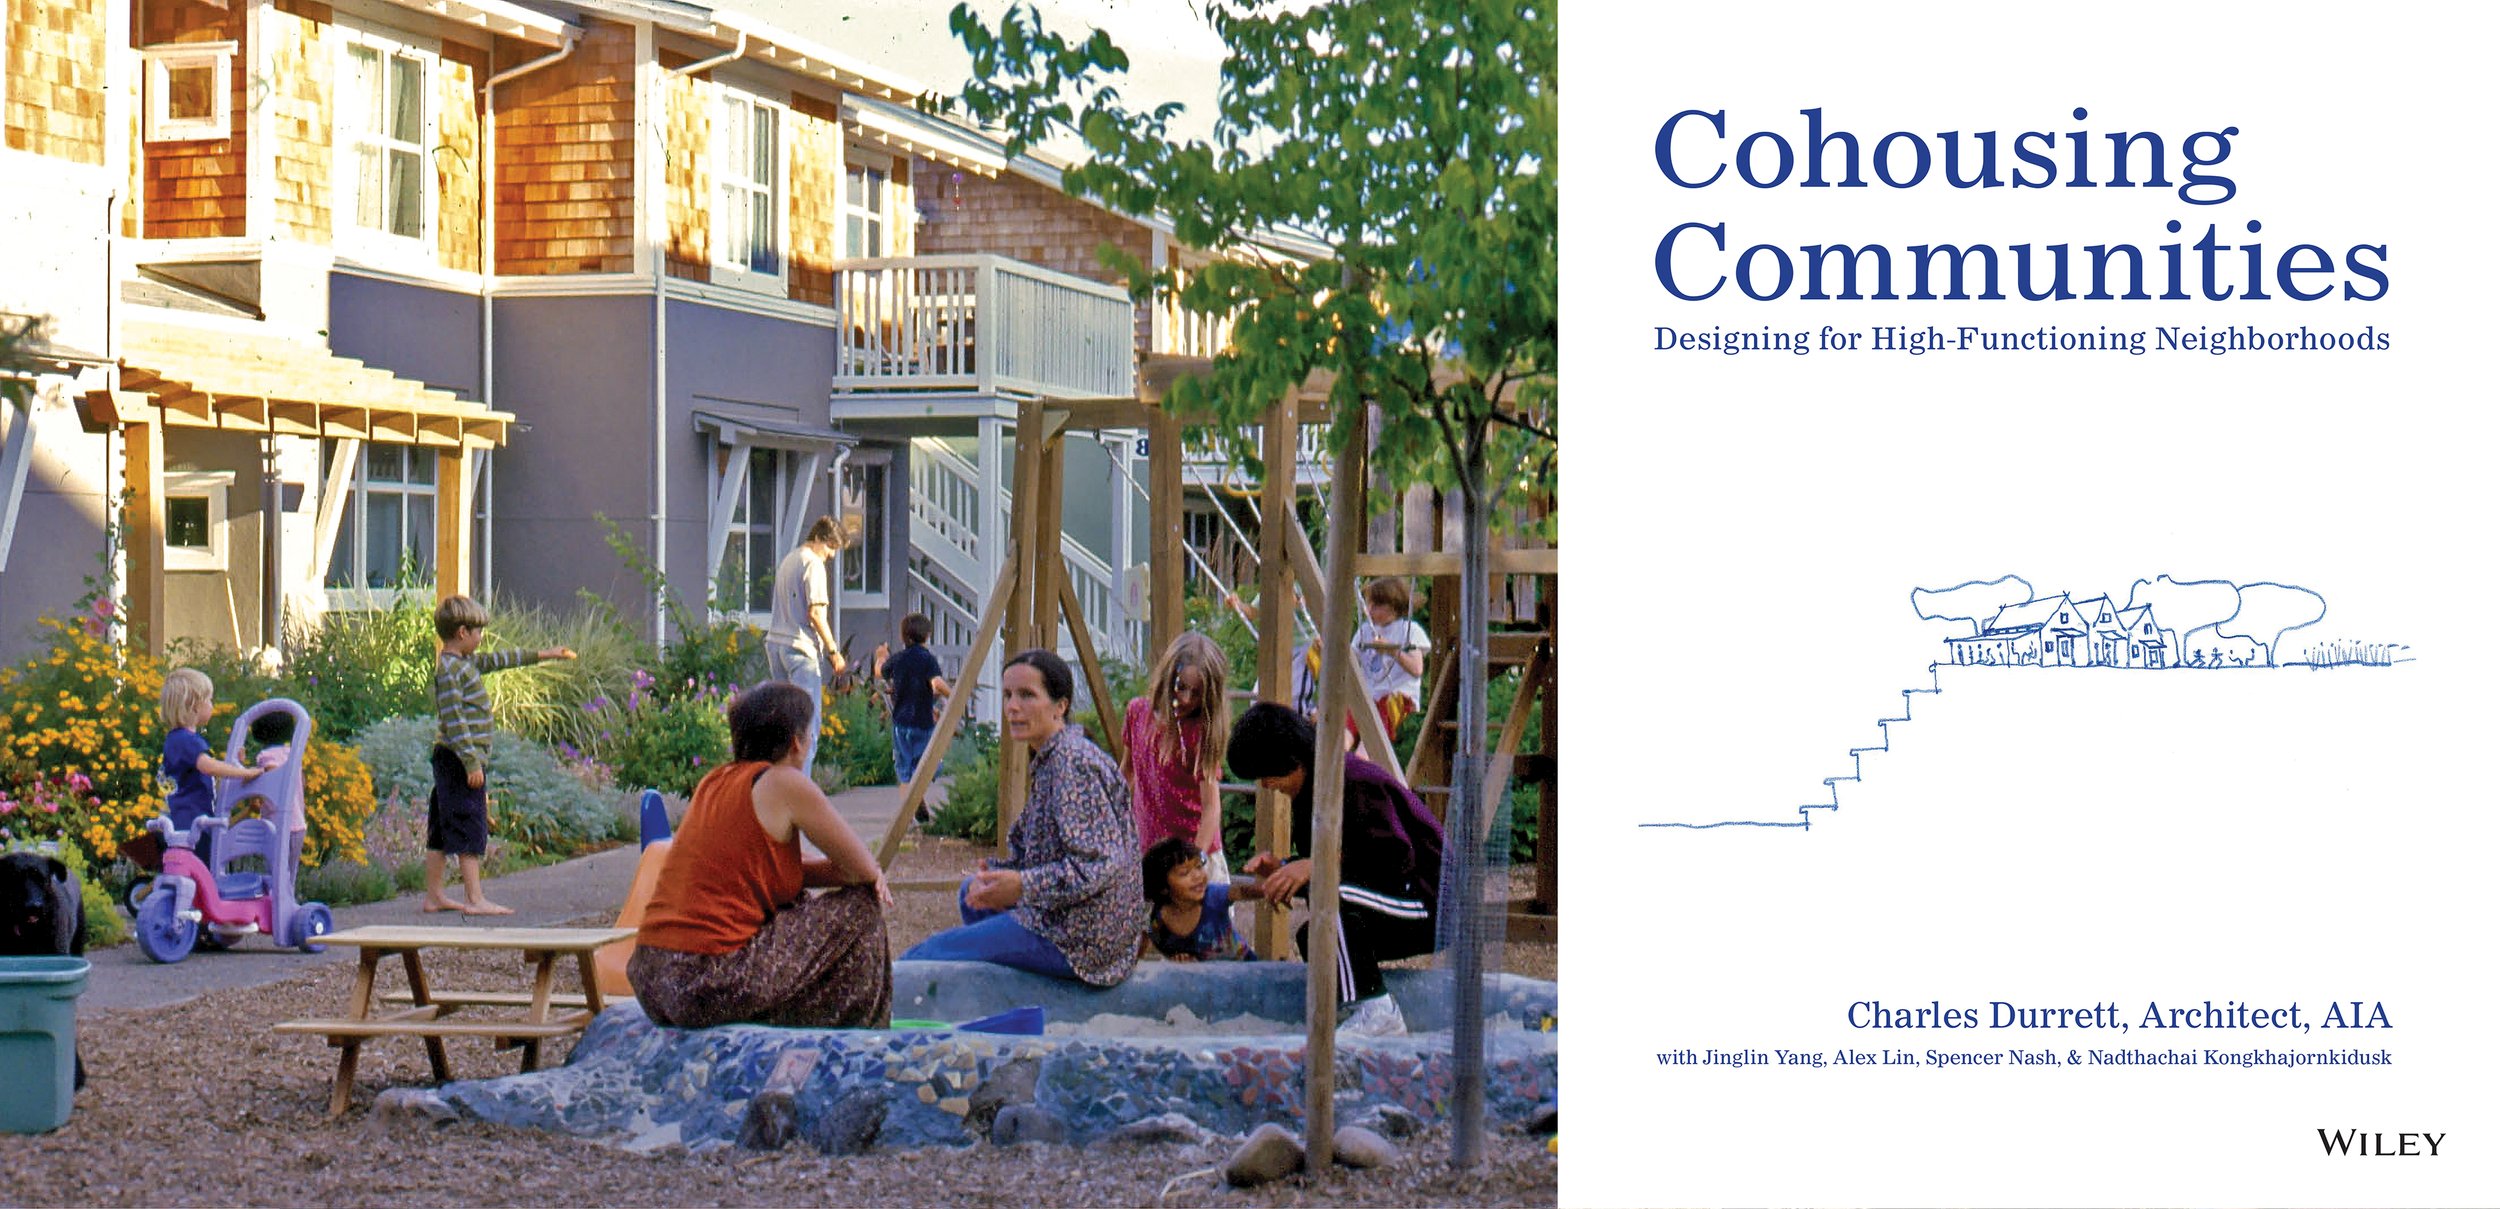 Cohousing Communities Now Available on Amazon and Wiley